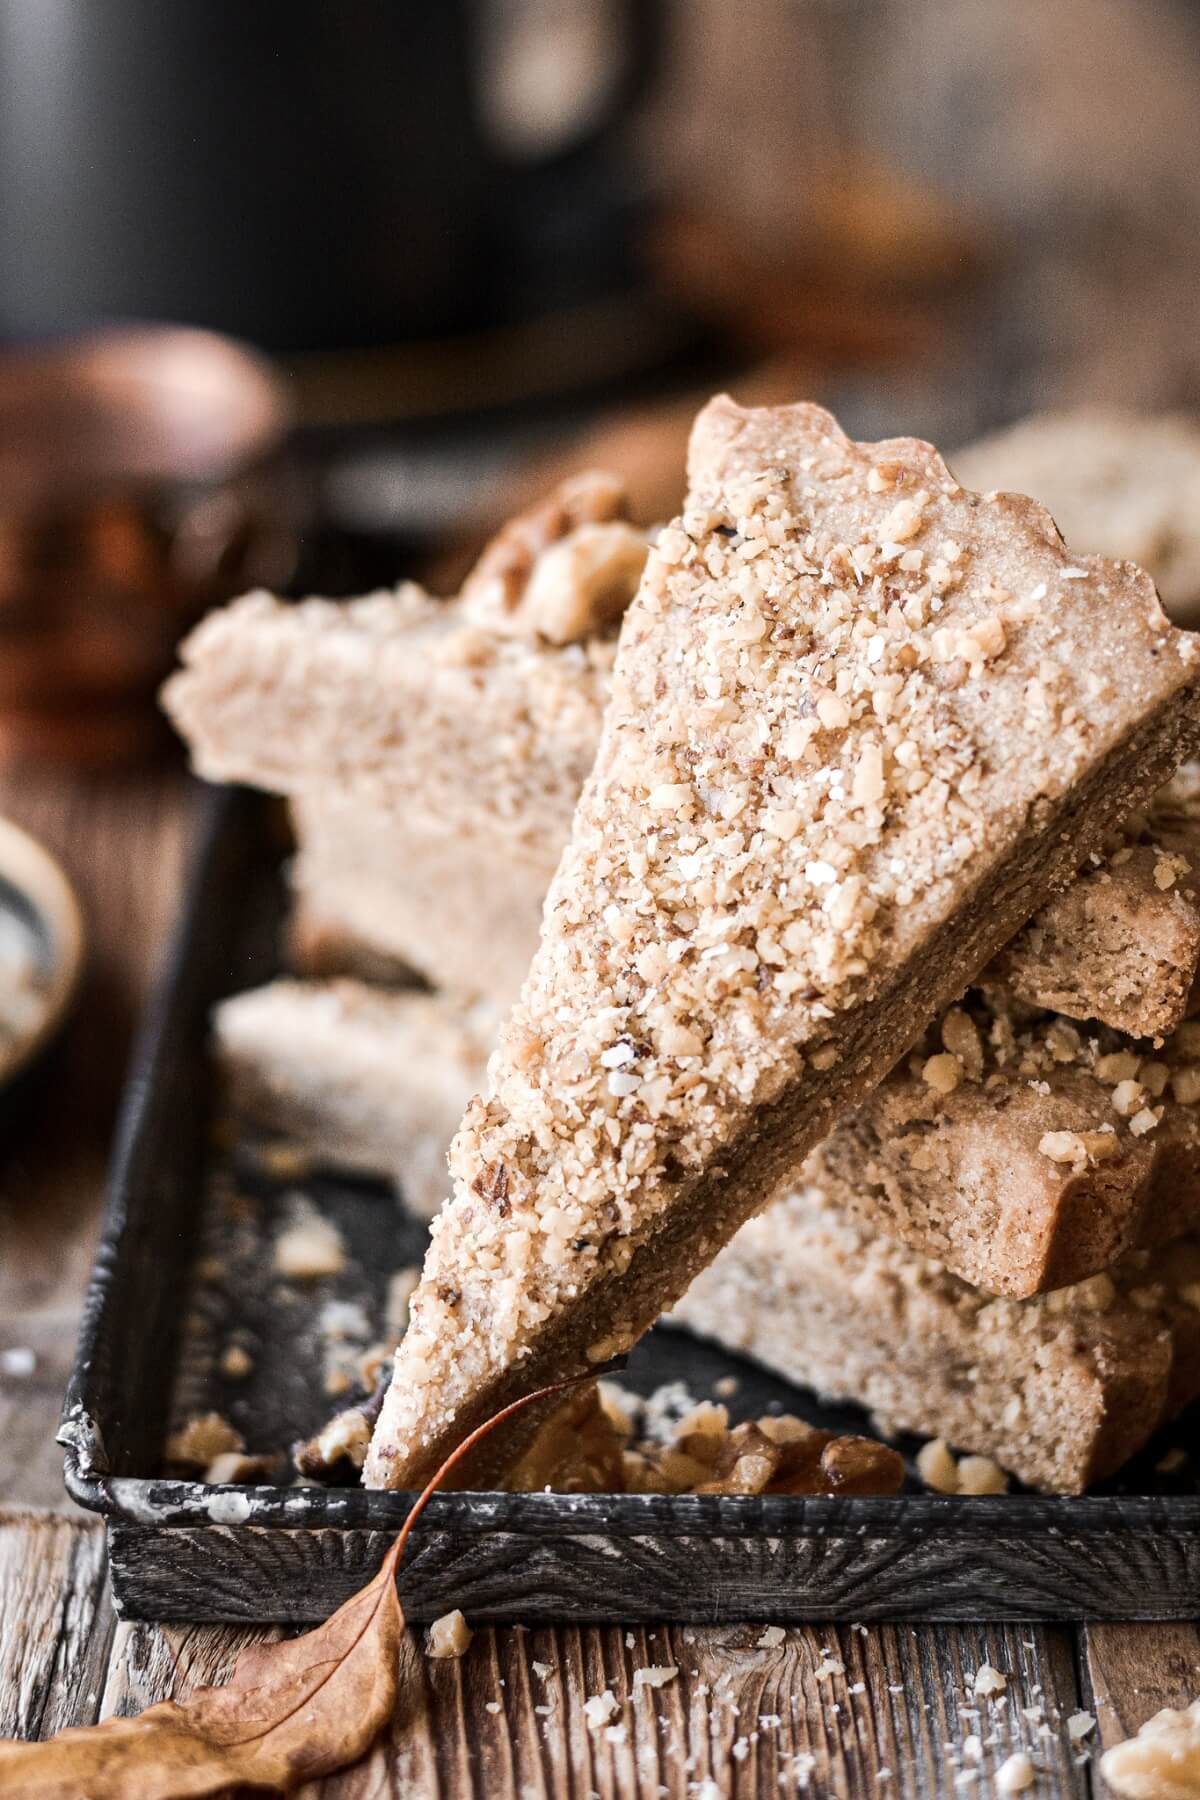 Wedges of maple walnut shortbread sprinkled with chopped walnuts.